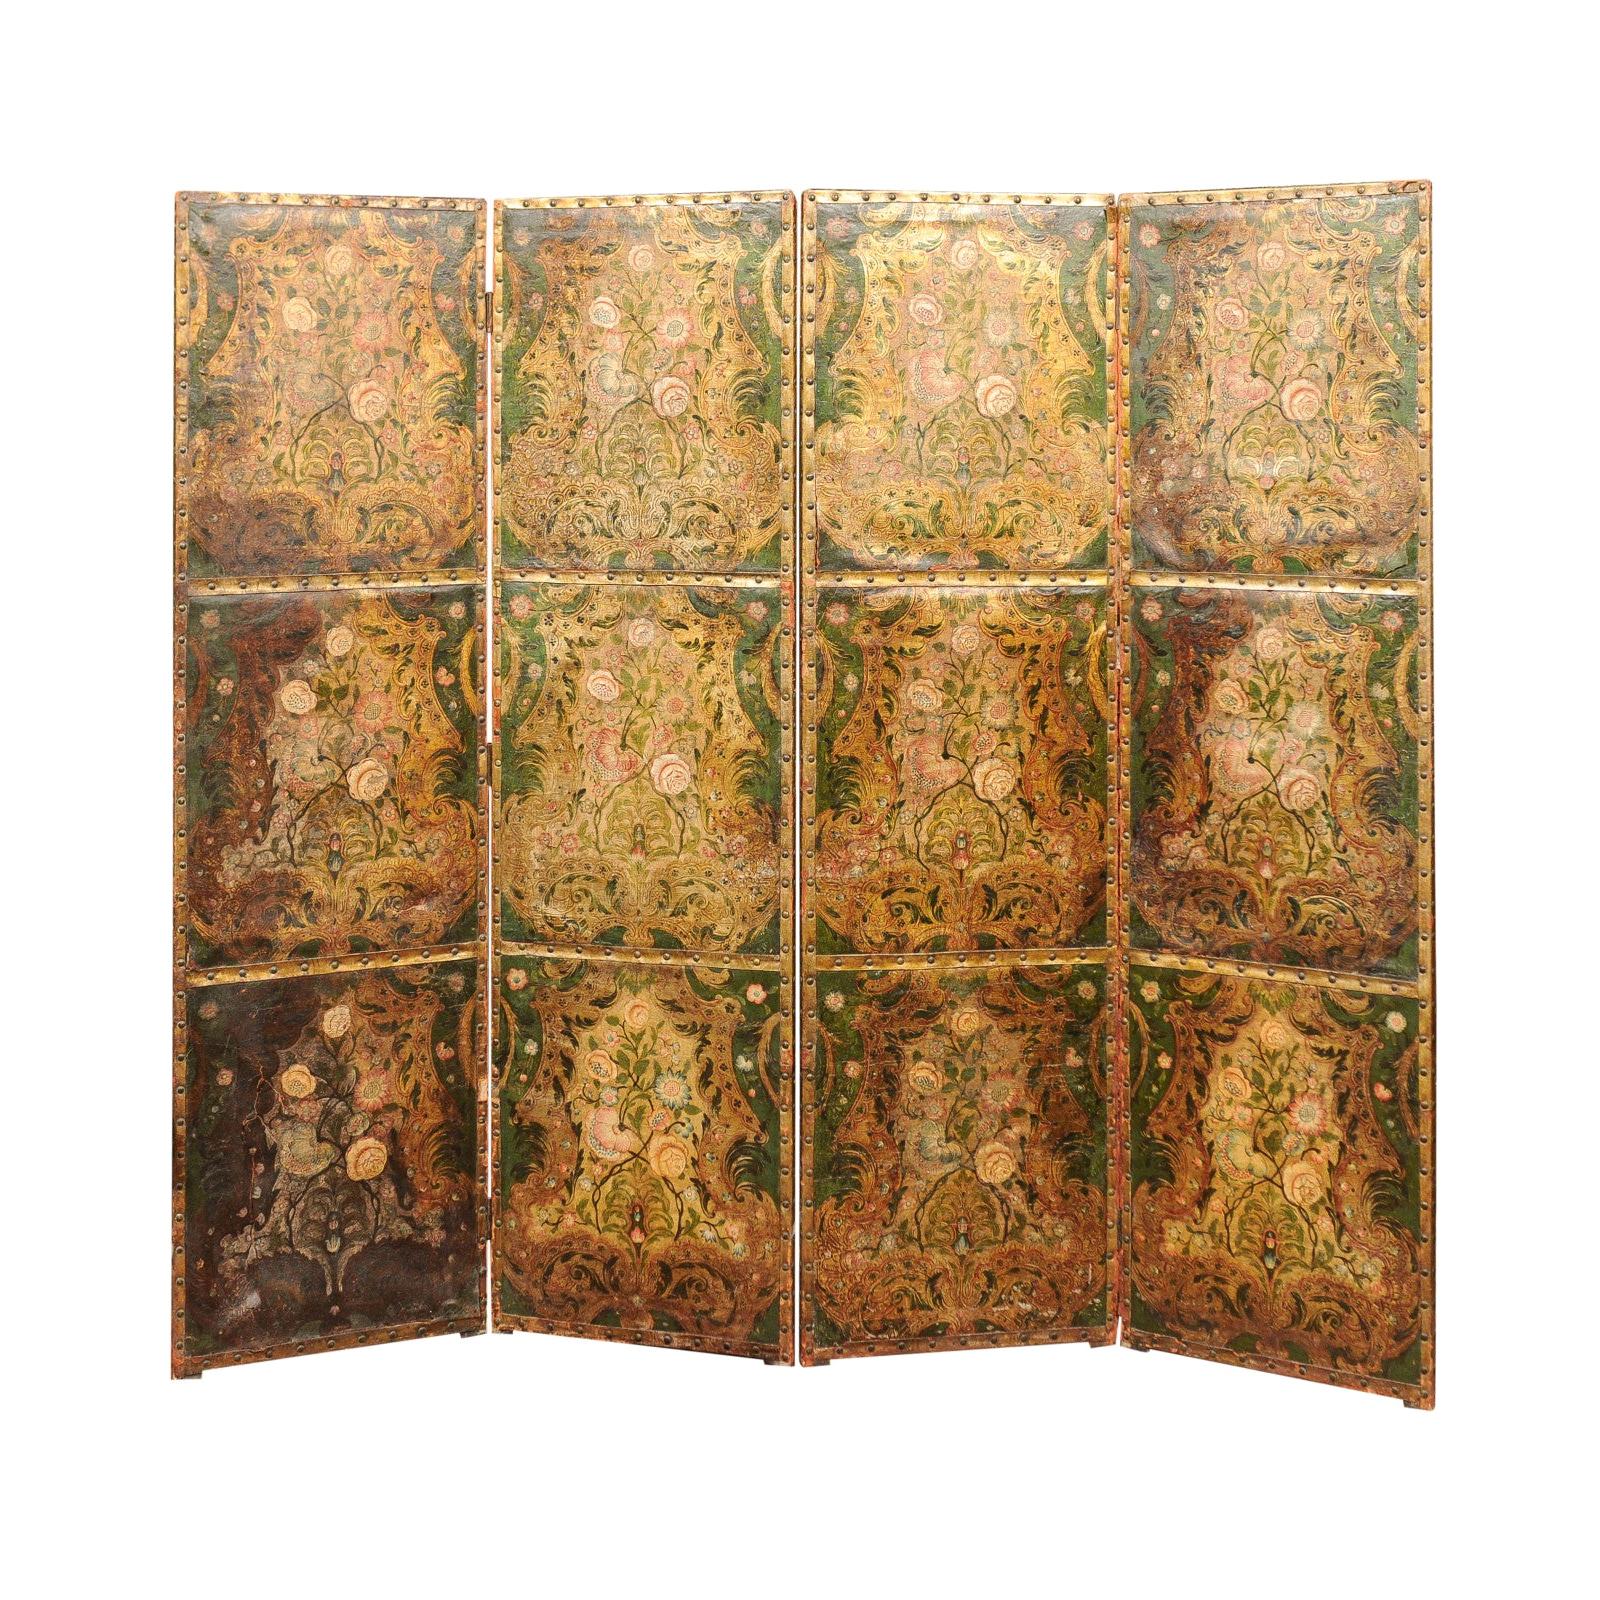 French Embossed Leather Floral Design 4-Panel Screen, 18th Century